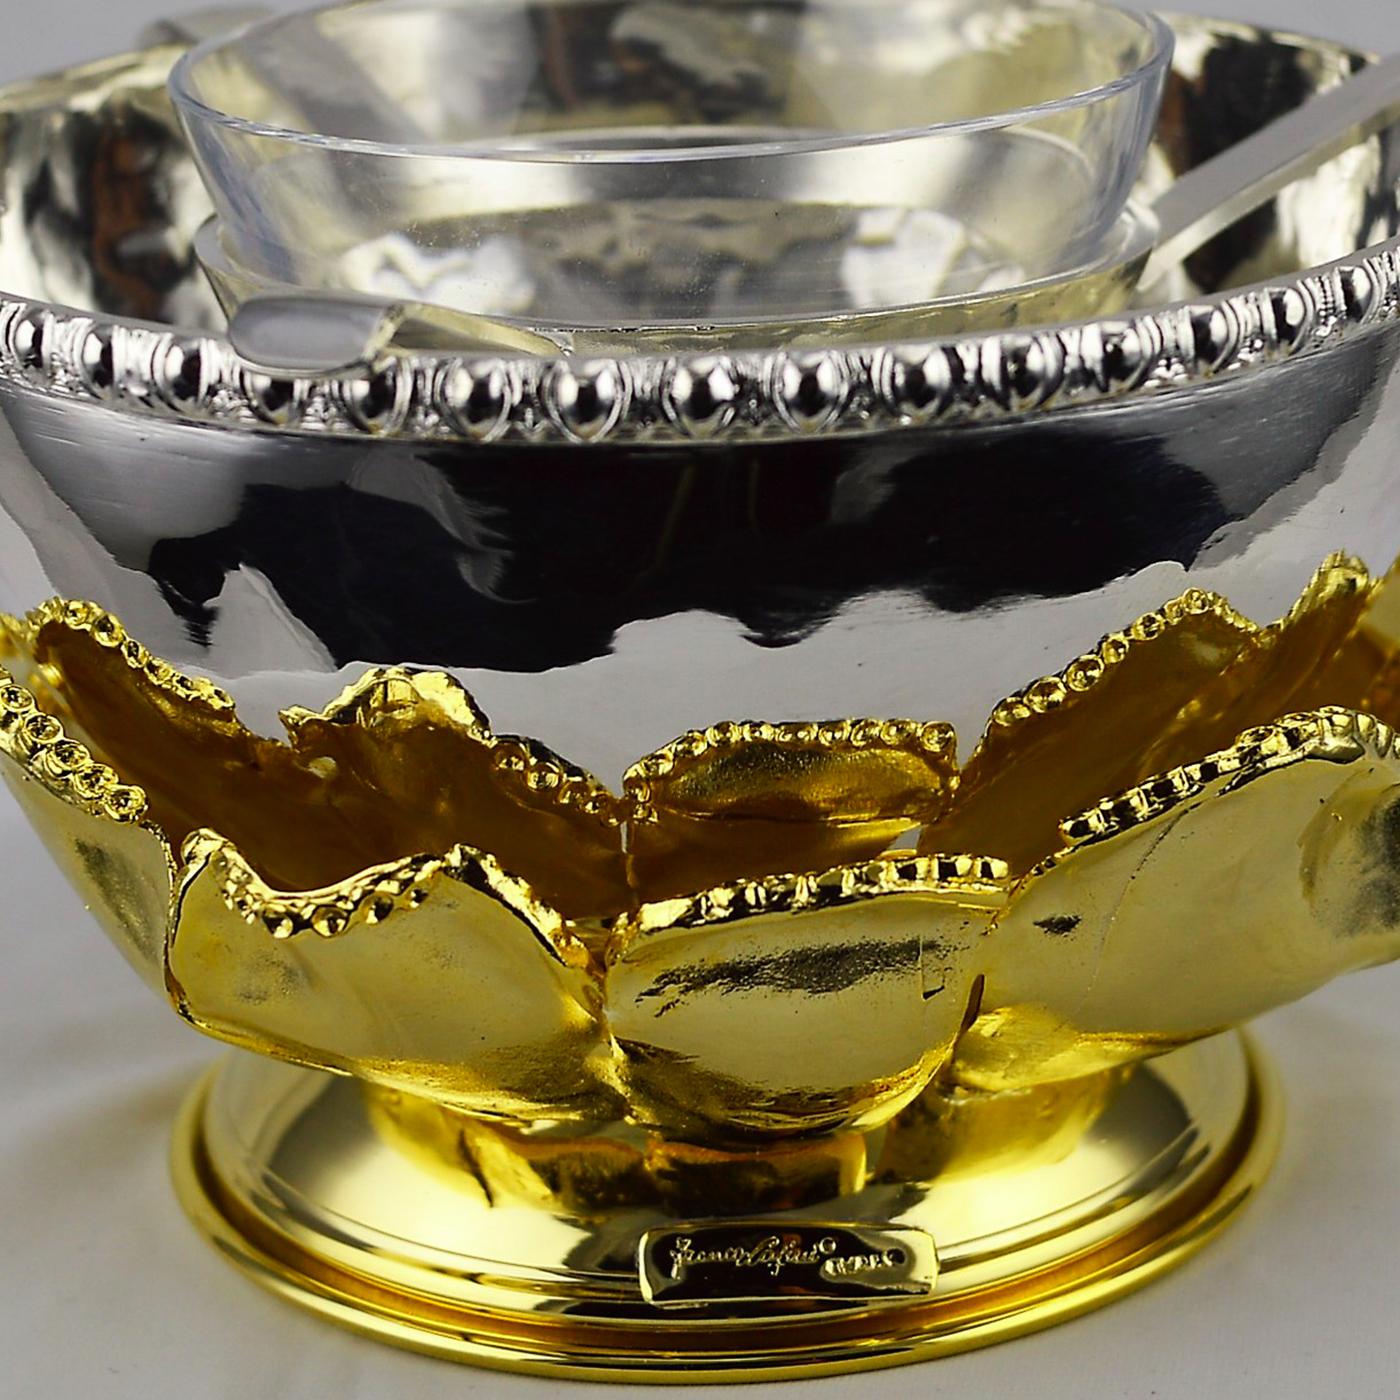 Just like the petals of a rare flower that open to receive the warm glow of the sun, this superb caviar bowl boasts a series of elements that raise up from its elongated base, creating soft curls and elegant curves. Resting on an oval base, this